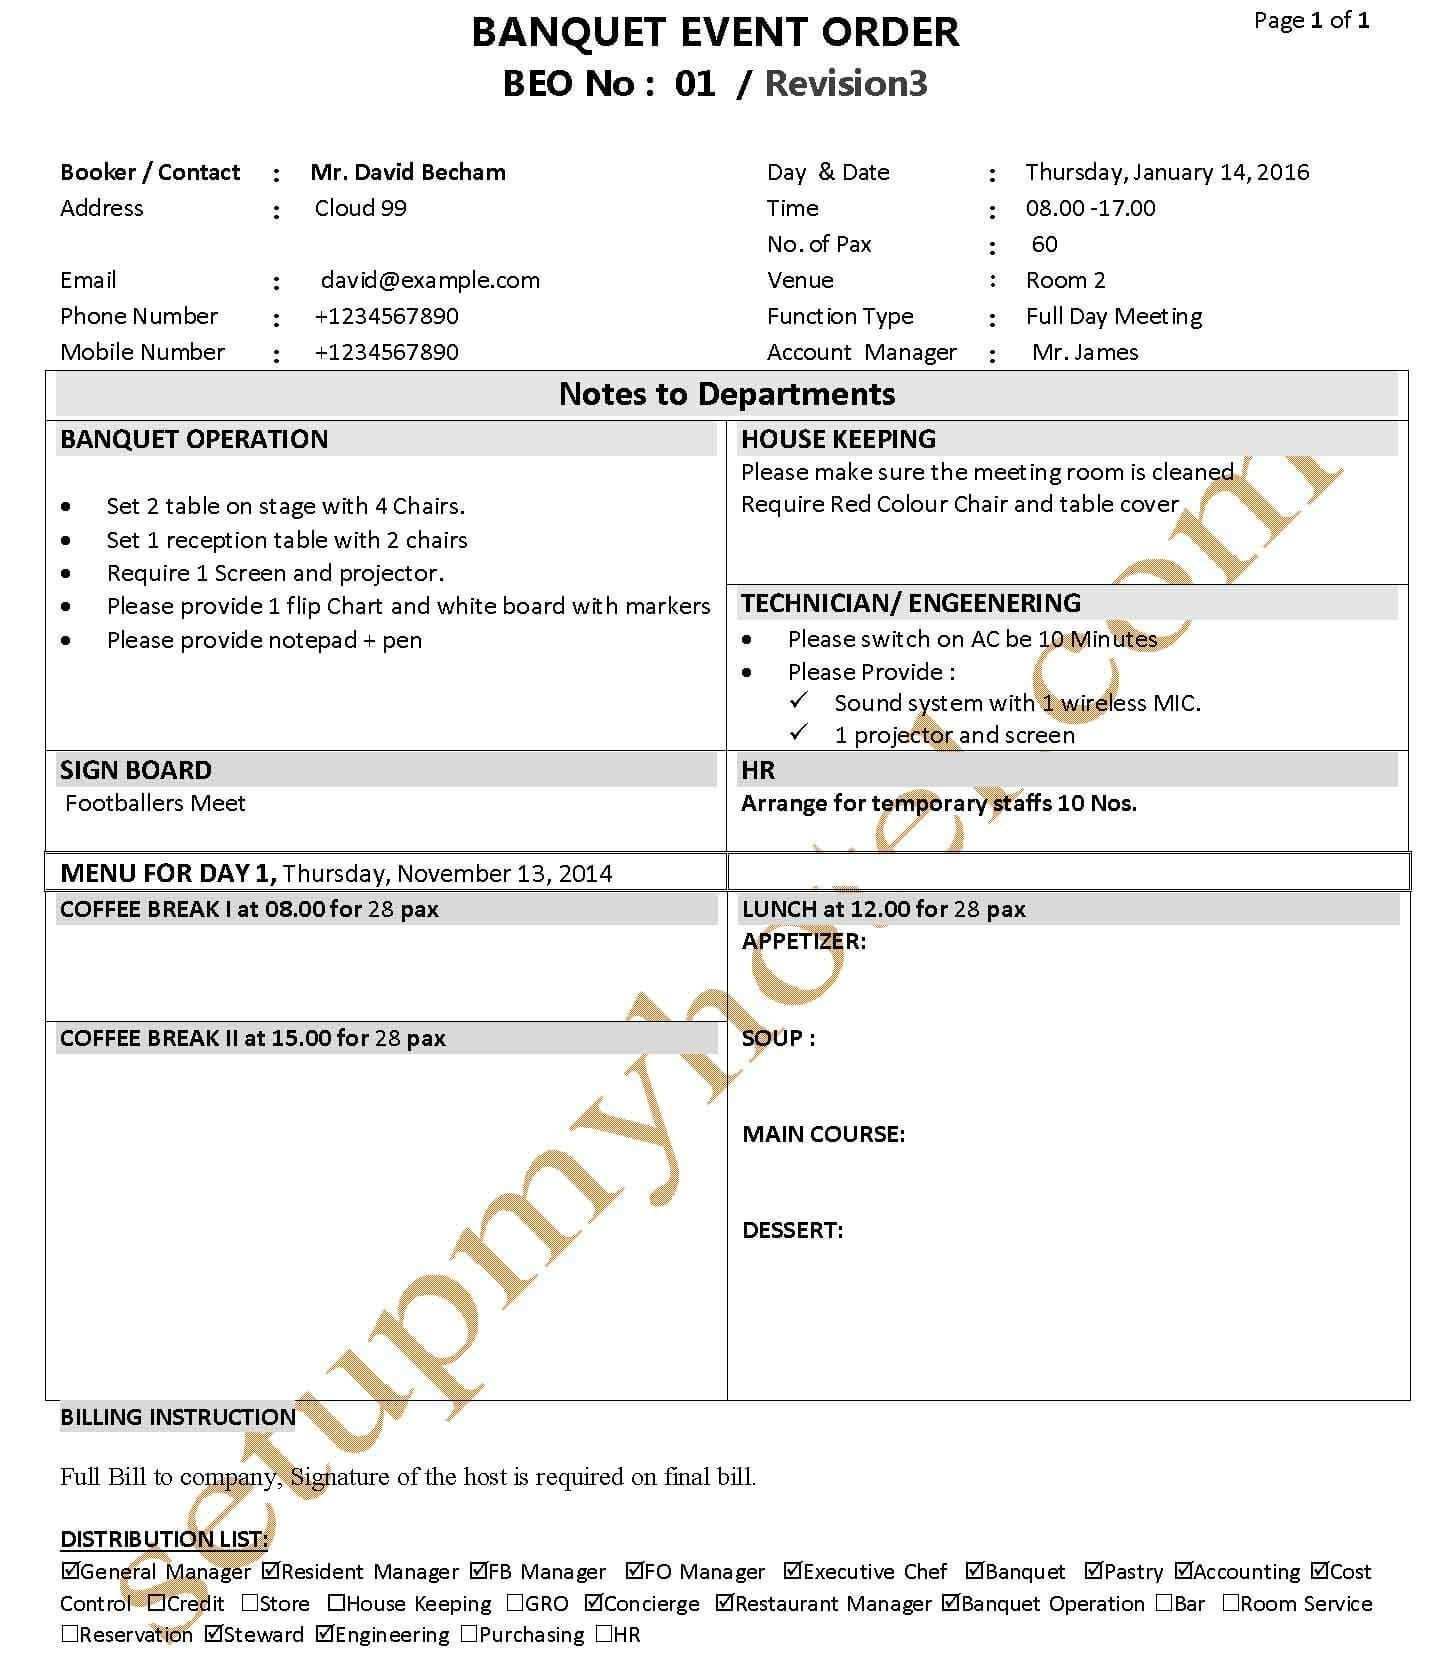 Banquet Function Sheet Banquet Event Order Beo Fp Banquet Formats Banquet Function S Event Planning Quotes Event Planning Template Event Planning Forms